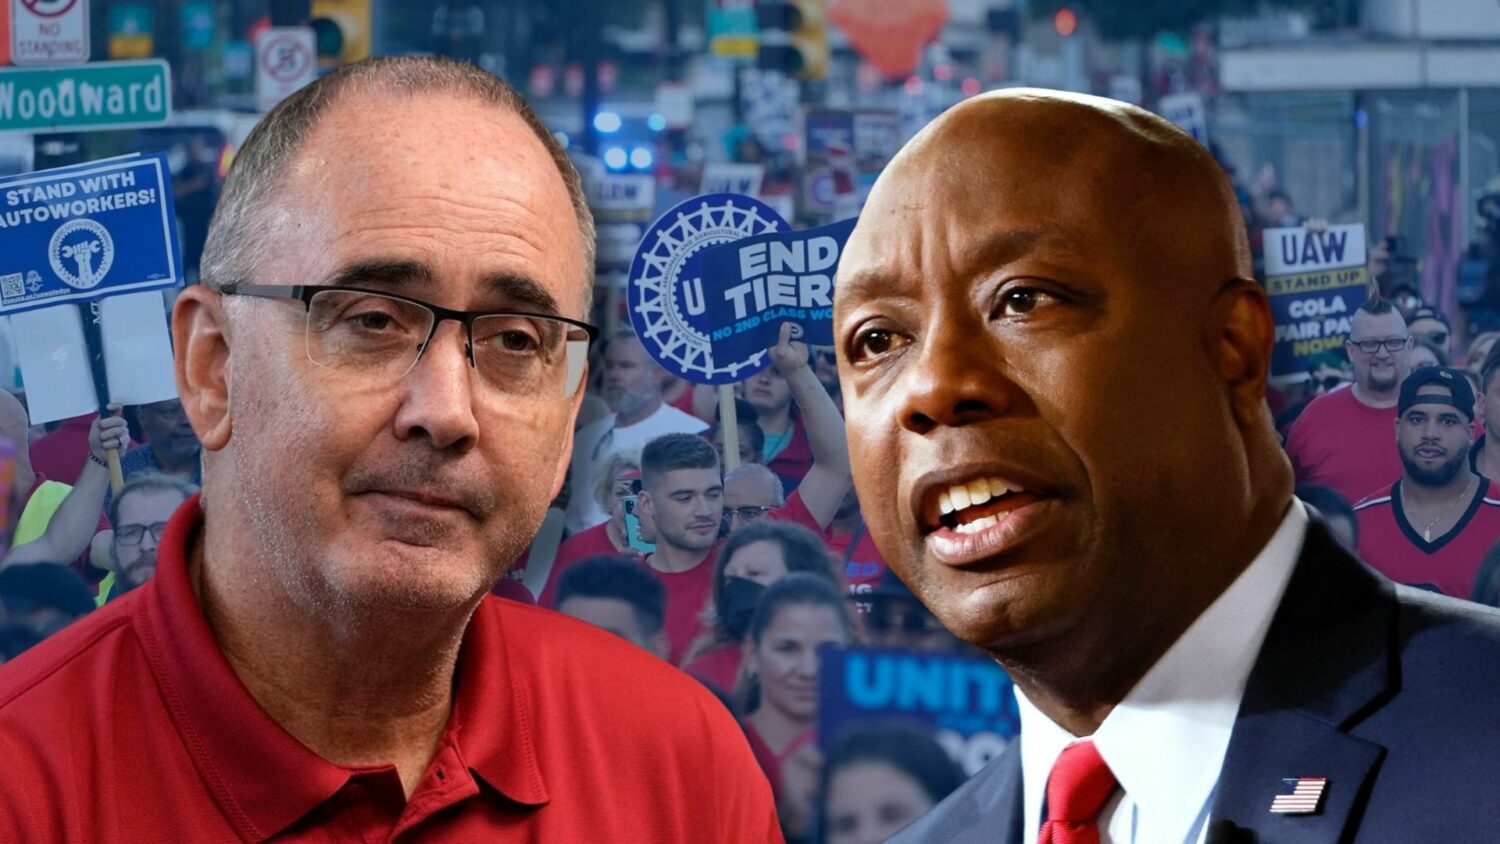 The United Auto Workers union has filed a labor complaint against Republican senator and 2024 GOP candidate Tim Scott.